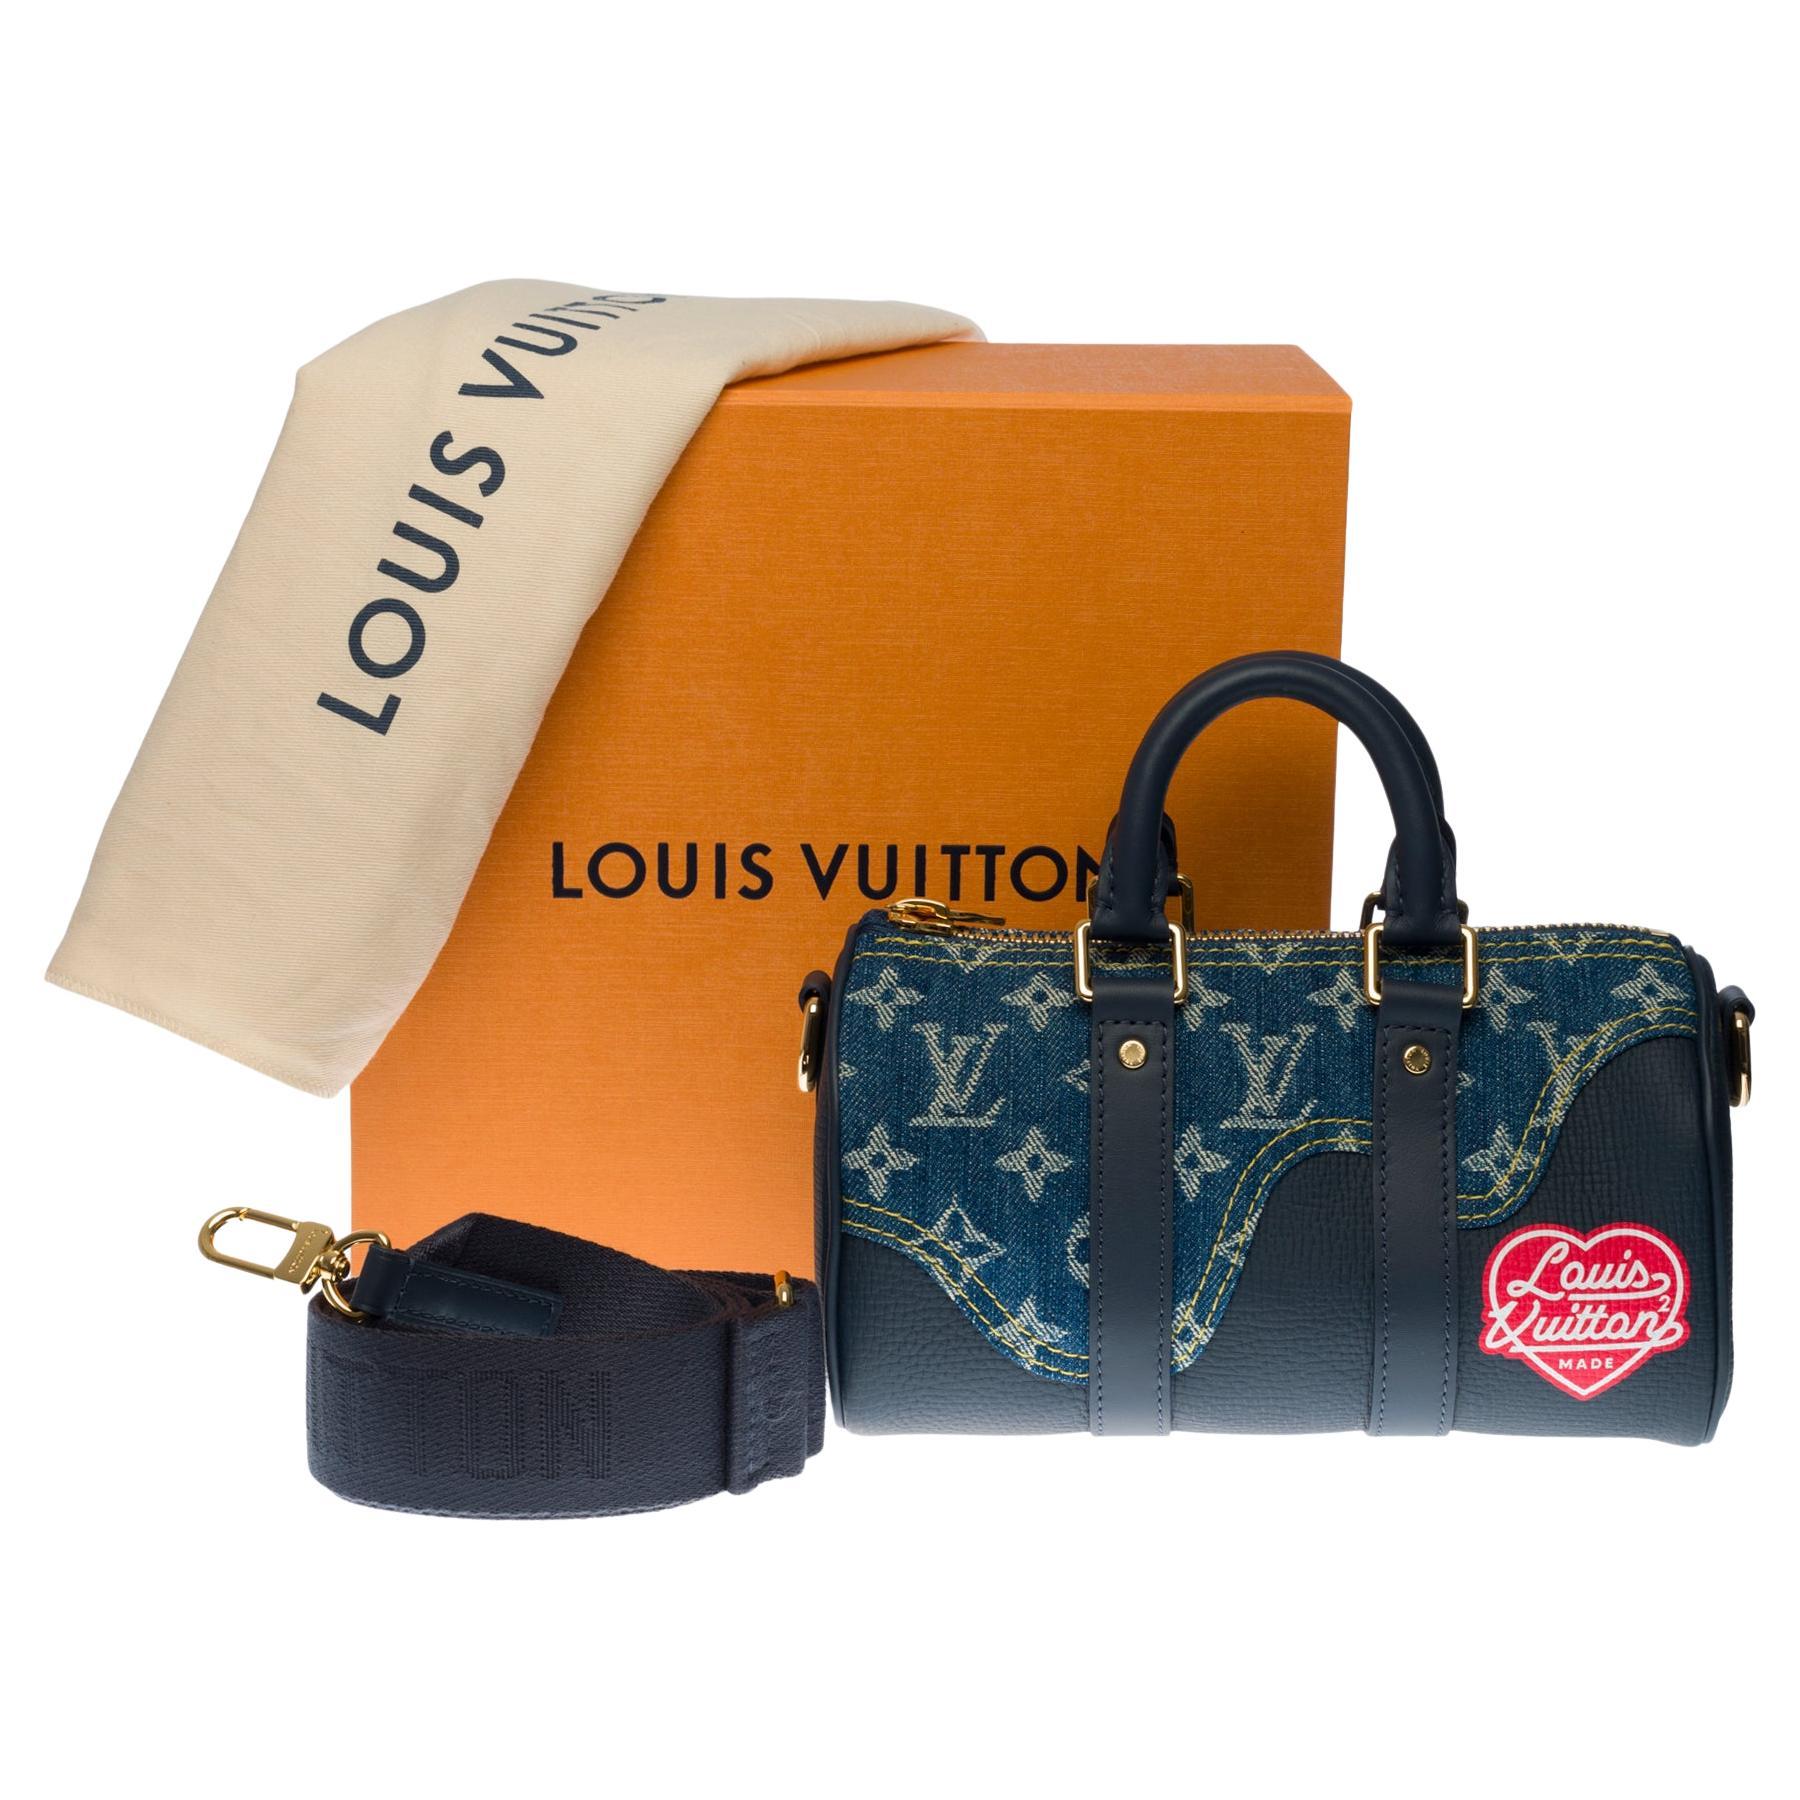 BRAND NEW-Limited edition Louis Vuitton keepall XS strap in blue denim by Nigo For Sale